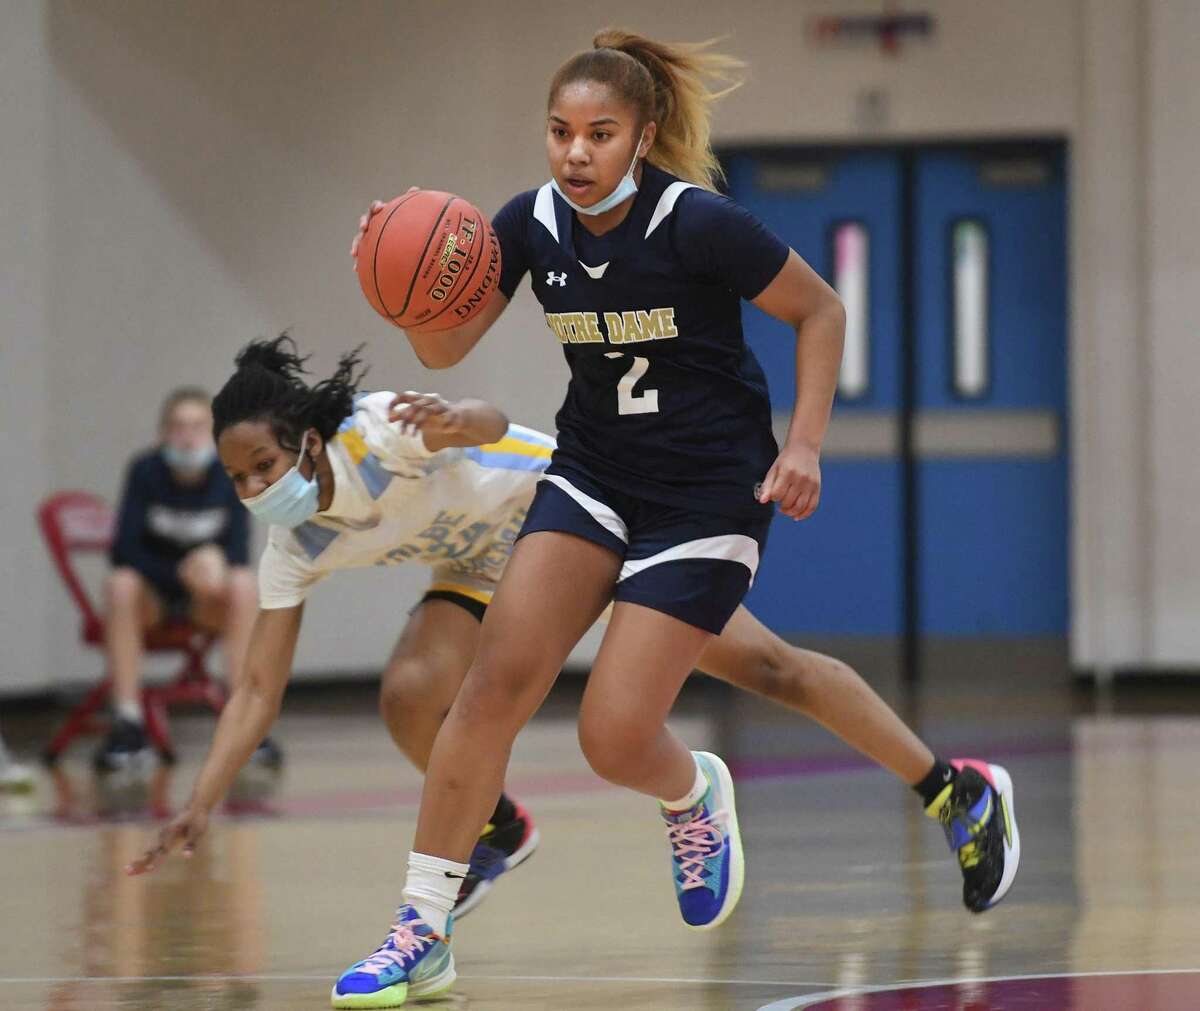 Notre Dame of Fairfield's Aizhanique Mayo races the ball up court during her team's girls basketball victory over Kolbe Cathedral at the Sheehan Center in Bridgeport, Conn. on Friday, January 28, 2022.